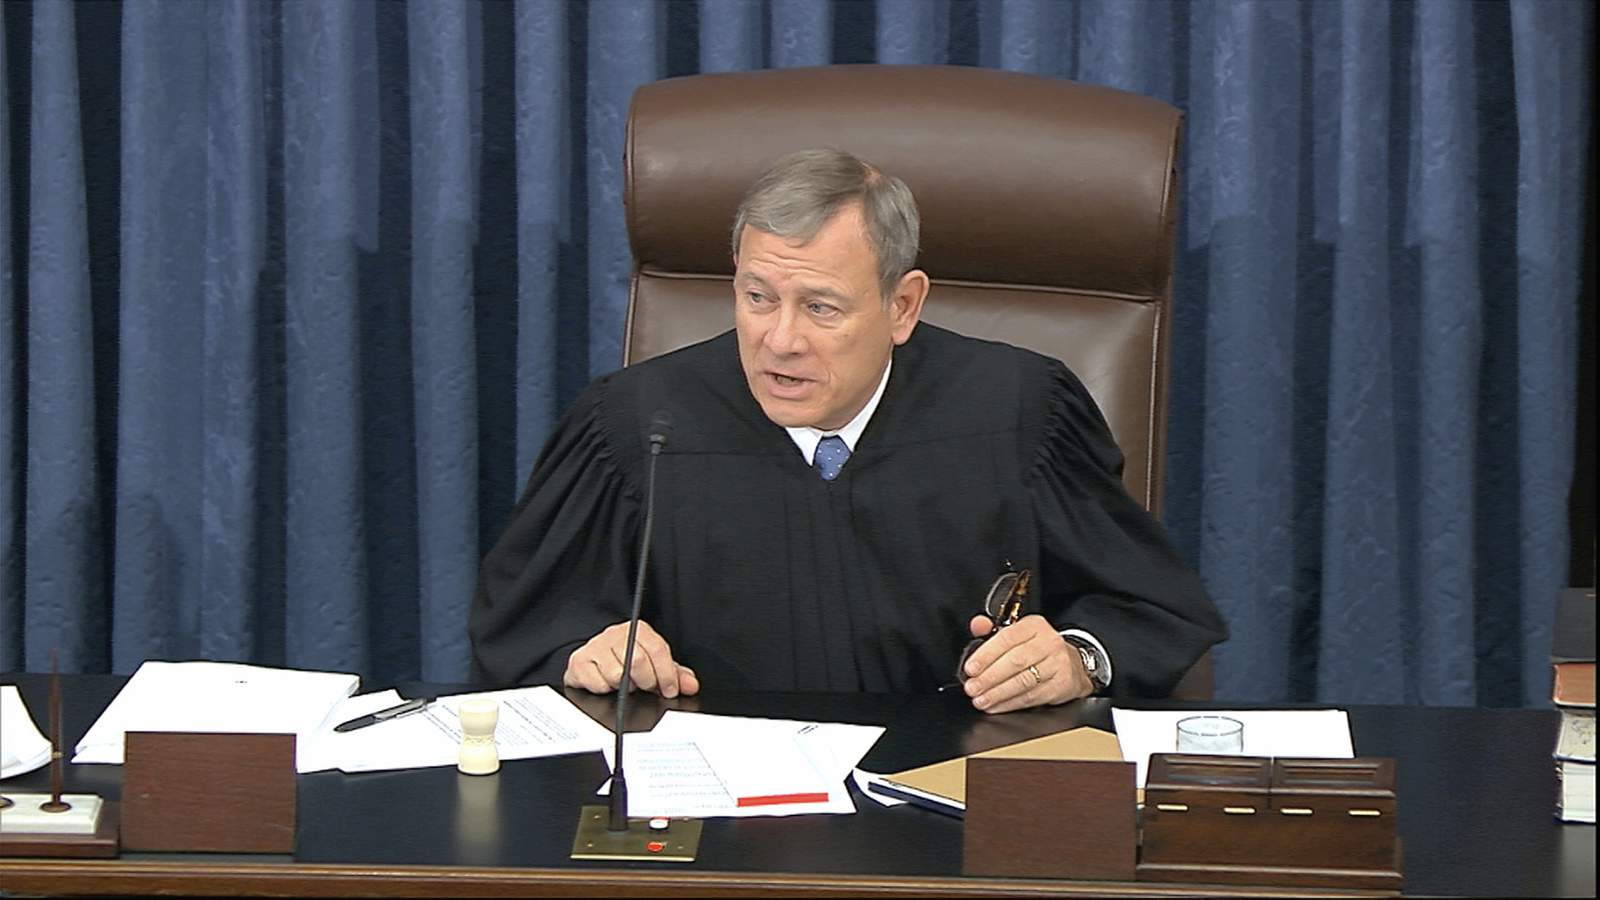 Chief justice's admonishment followed a note from Collins